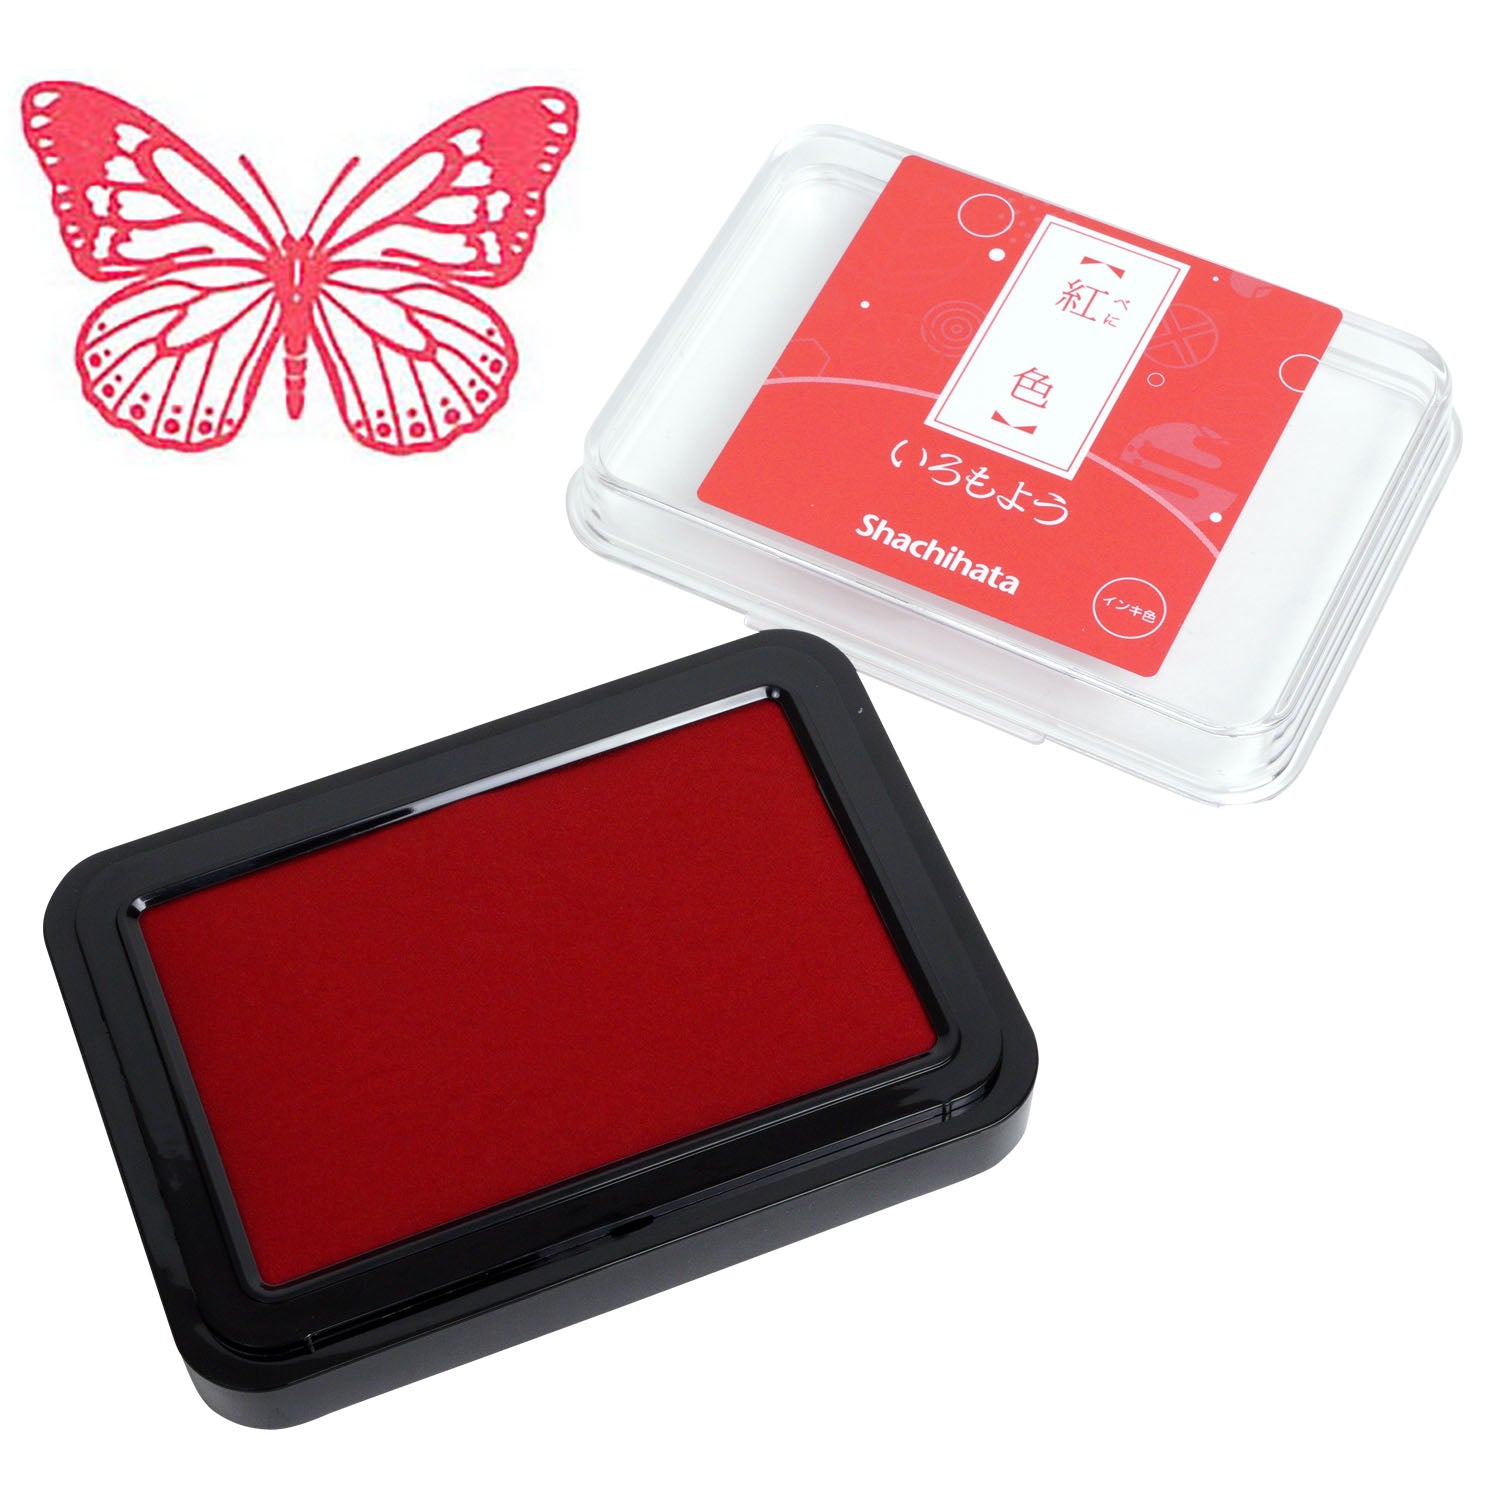 SHACHIHATA Iromoyou Stamp Pad HAC-1 Red